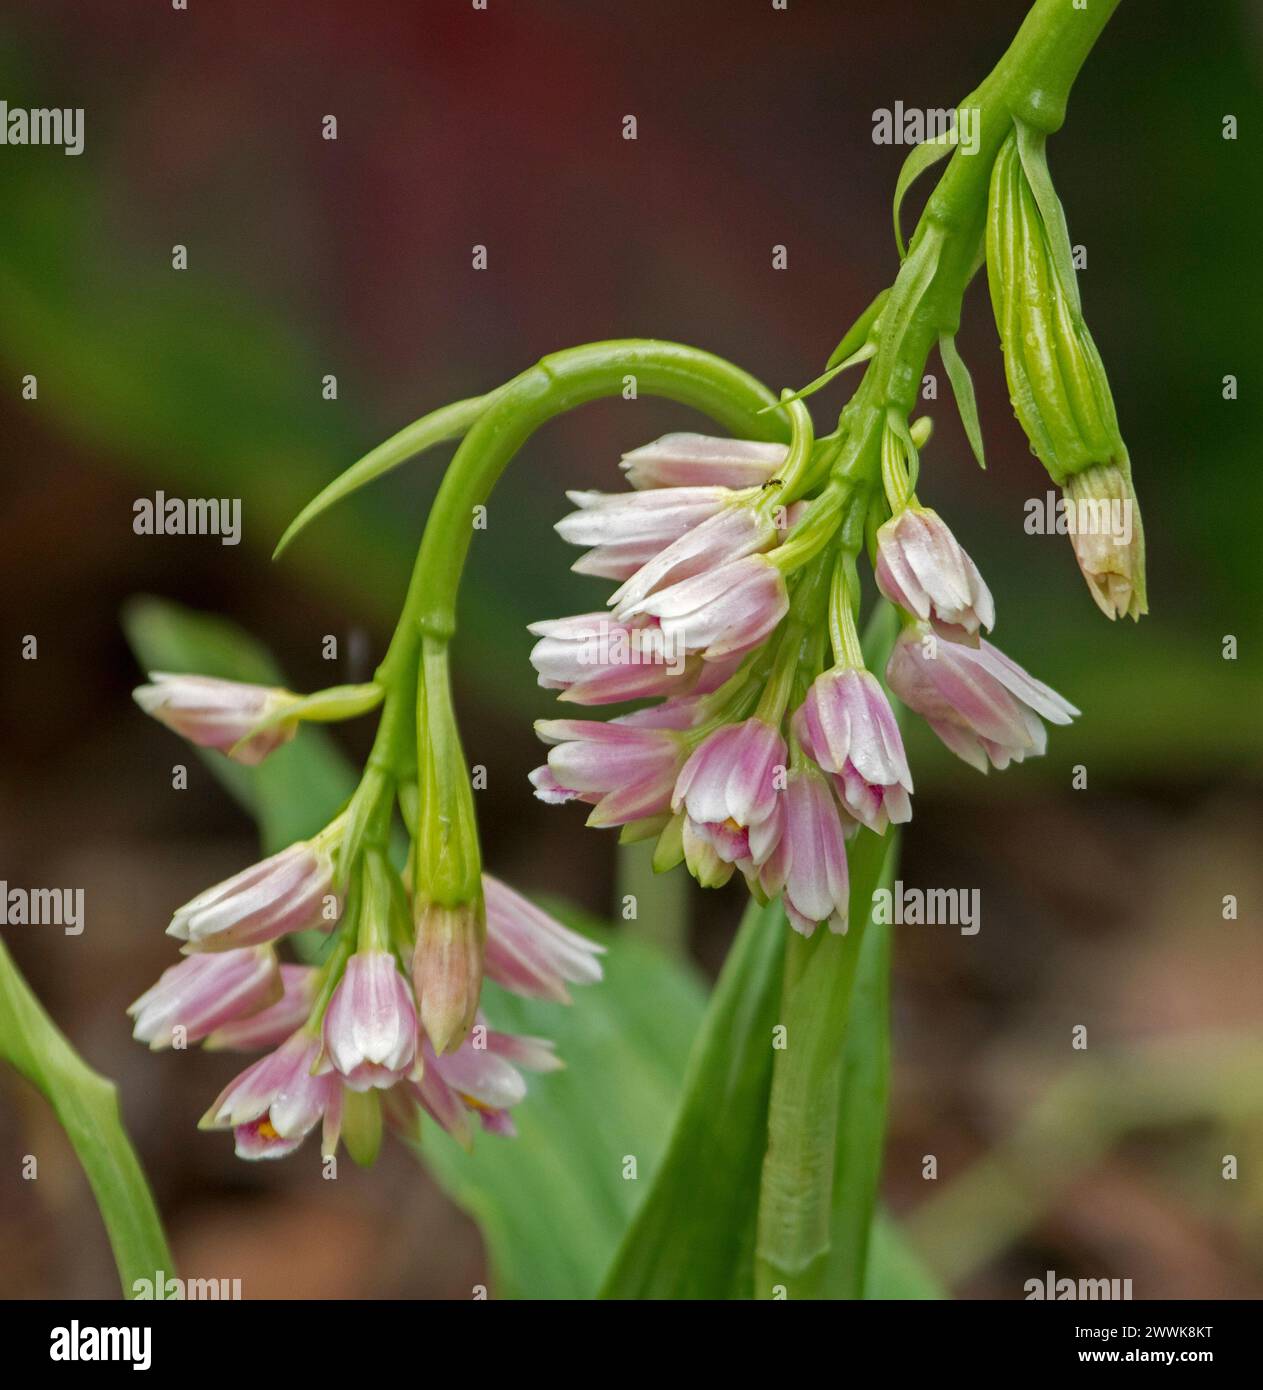 Clusters of pale pink flowers and green leaves of Nodding Orchid, Geodorum densiflorum, an Australian native plant on ligth brown background Stock Photo